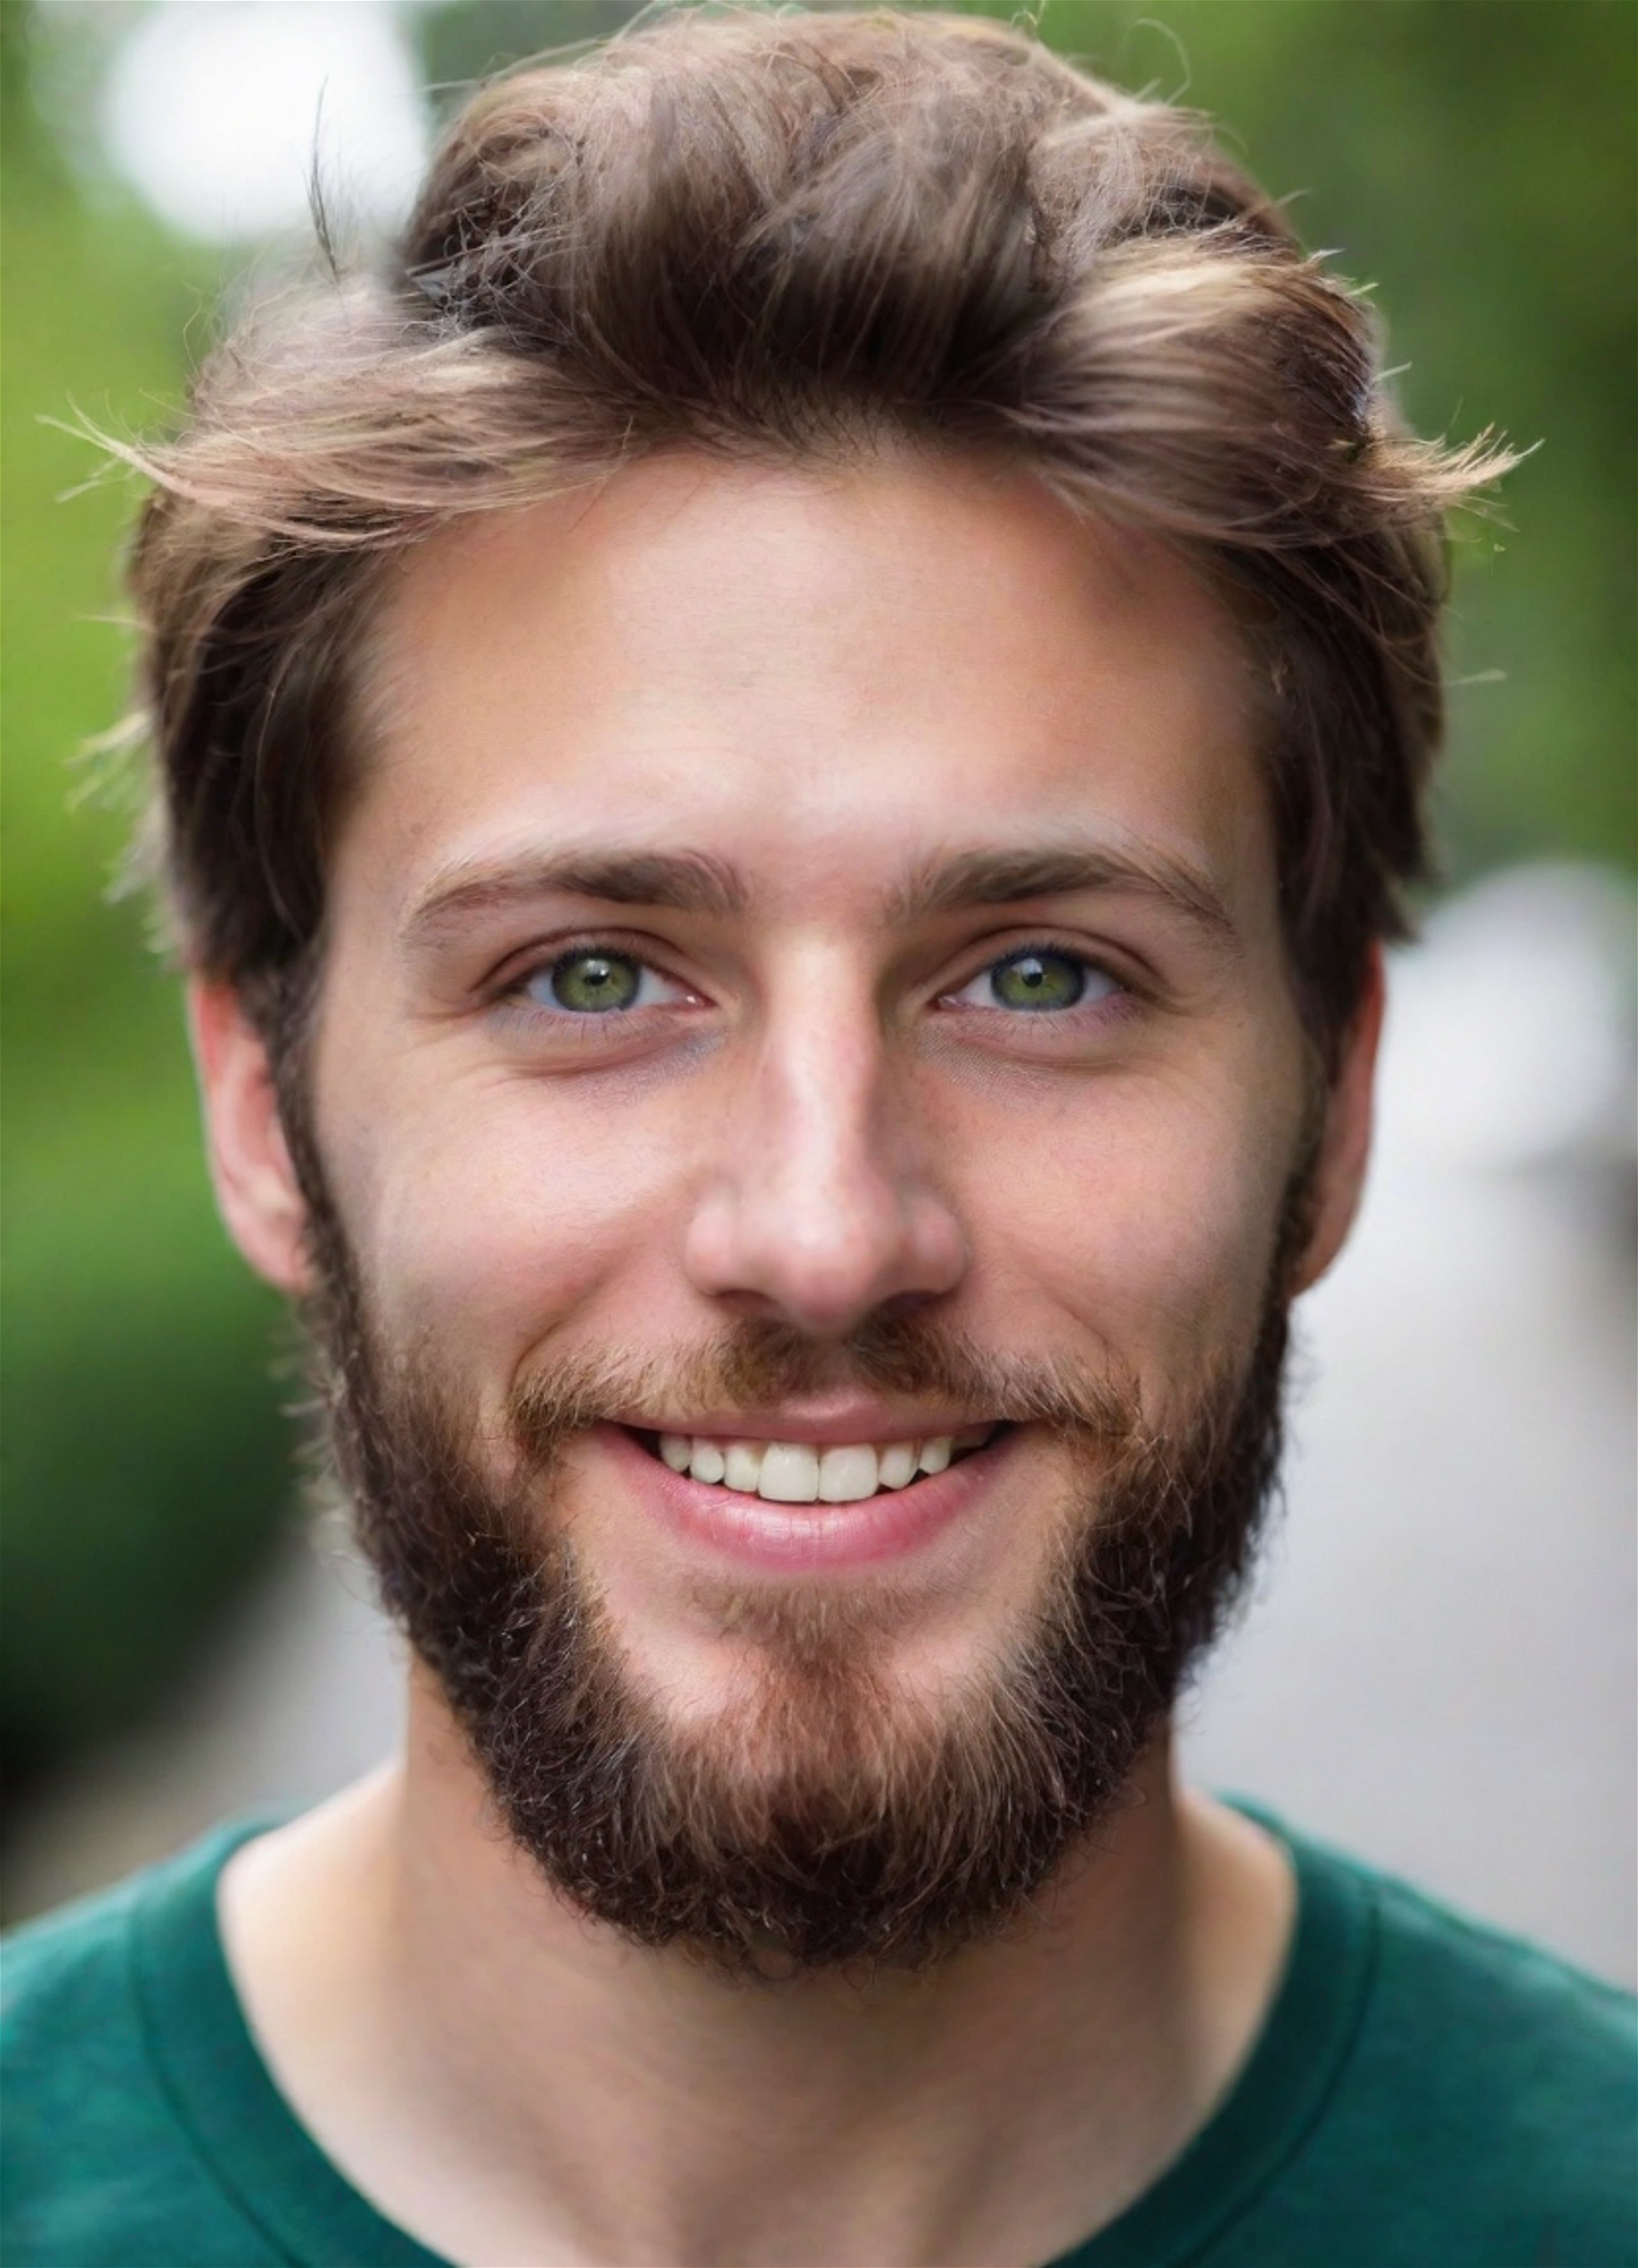 Portrait photo of a 25 years old american man, beard, green eyes, charming smile